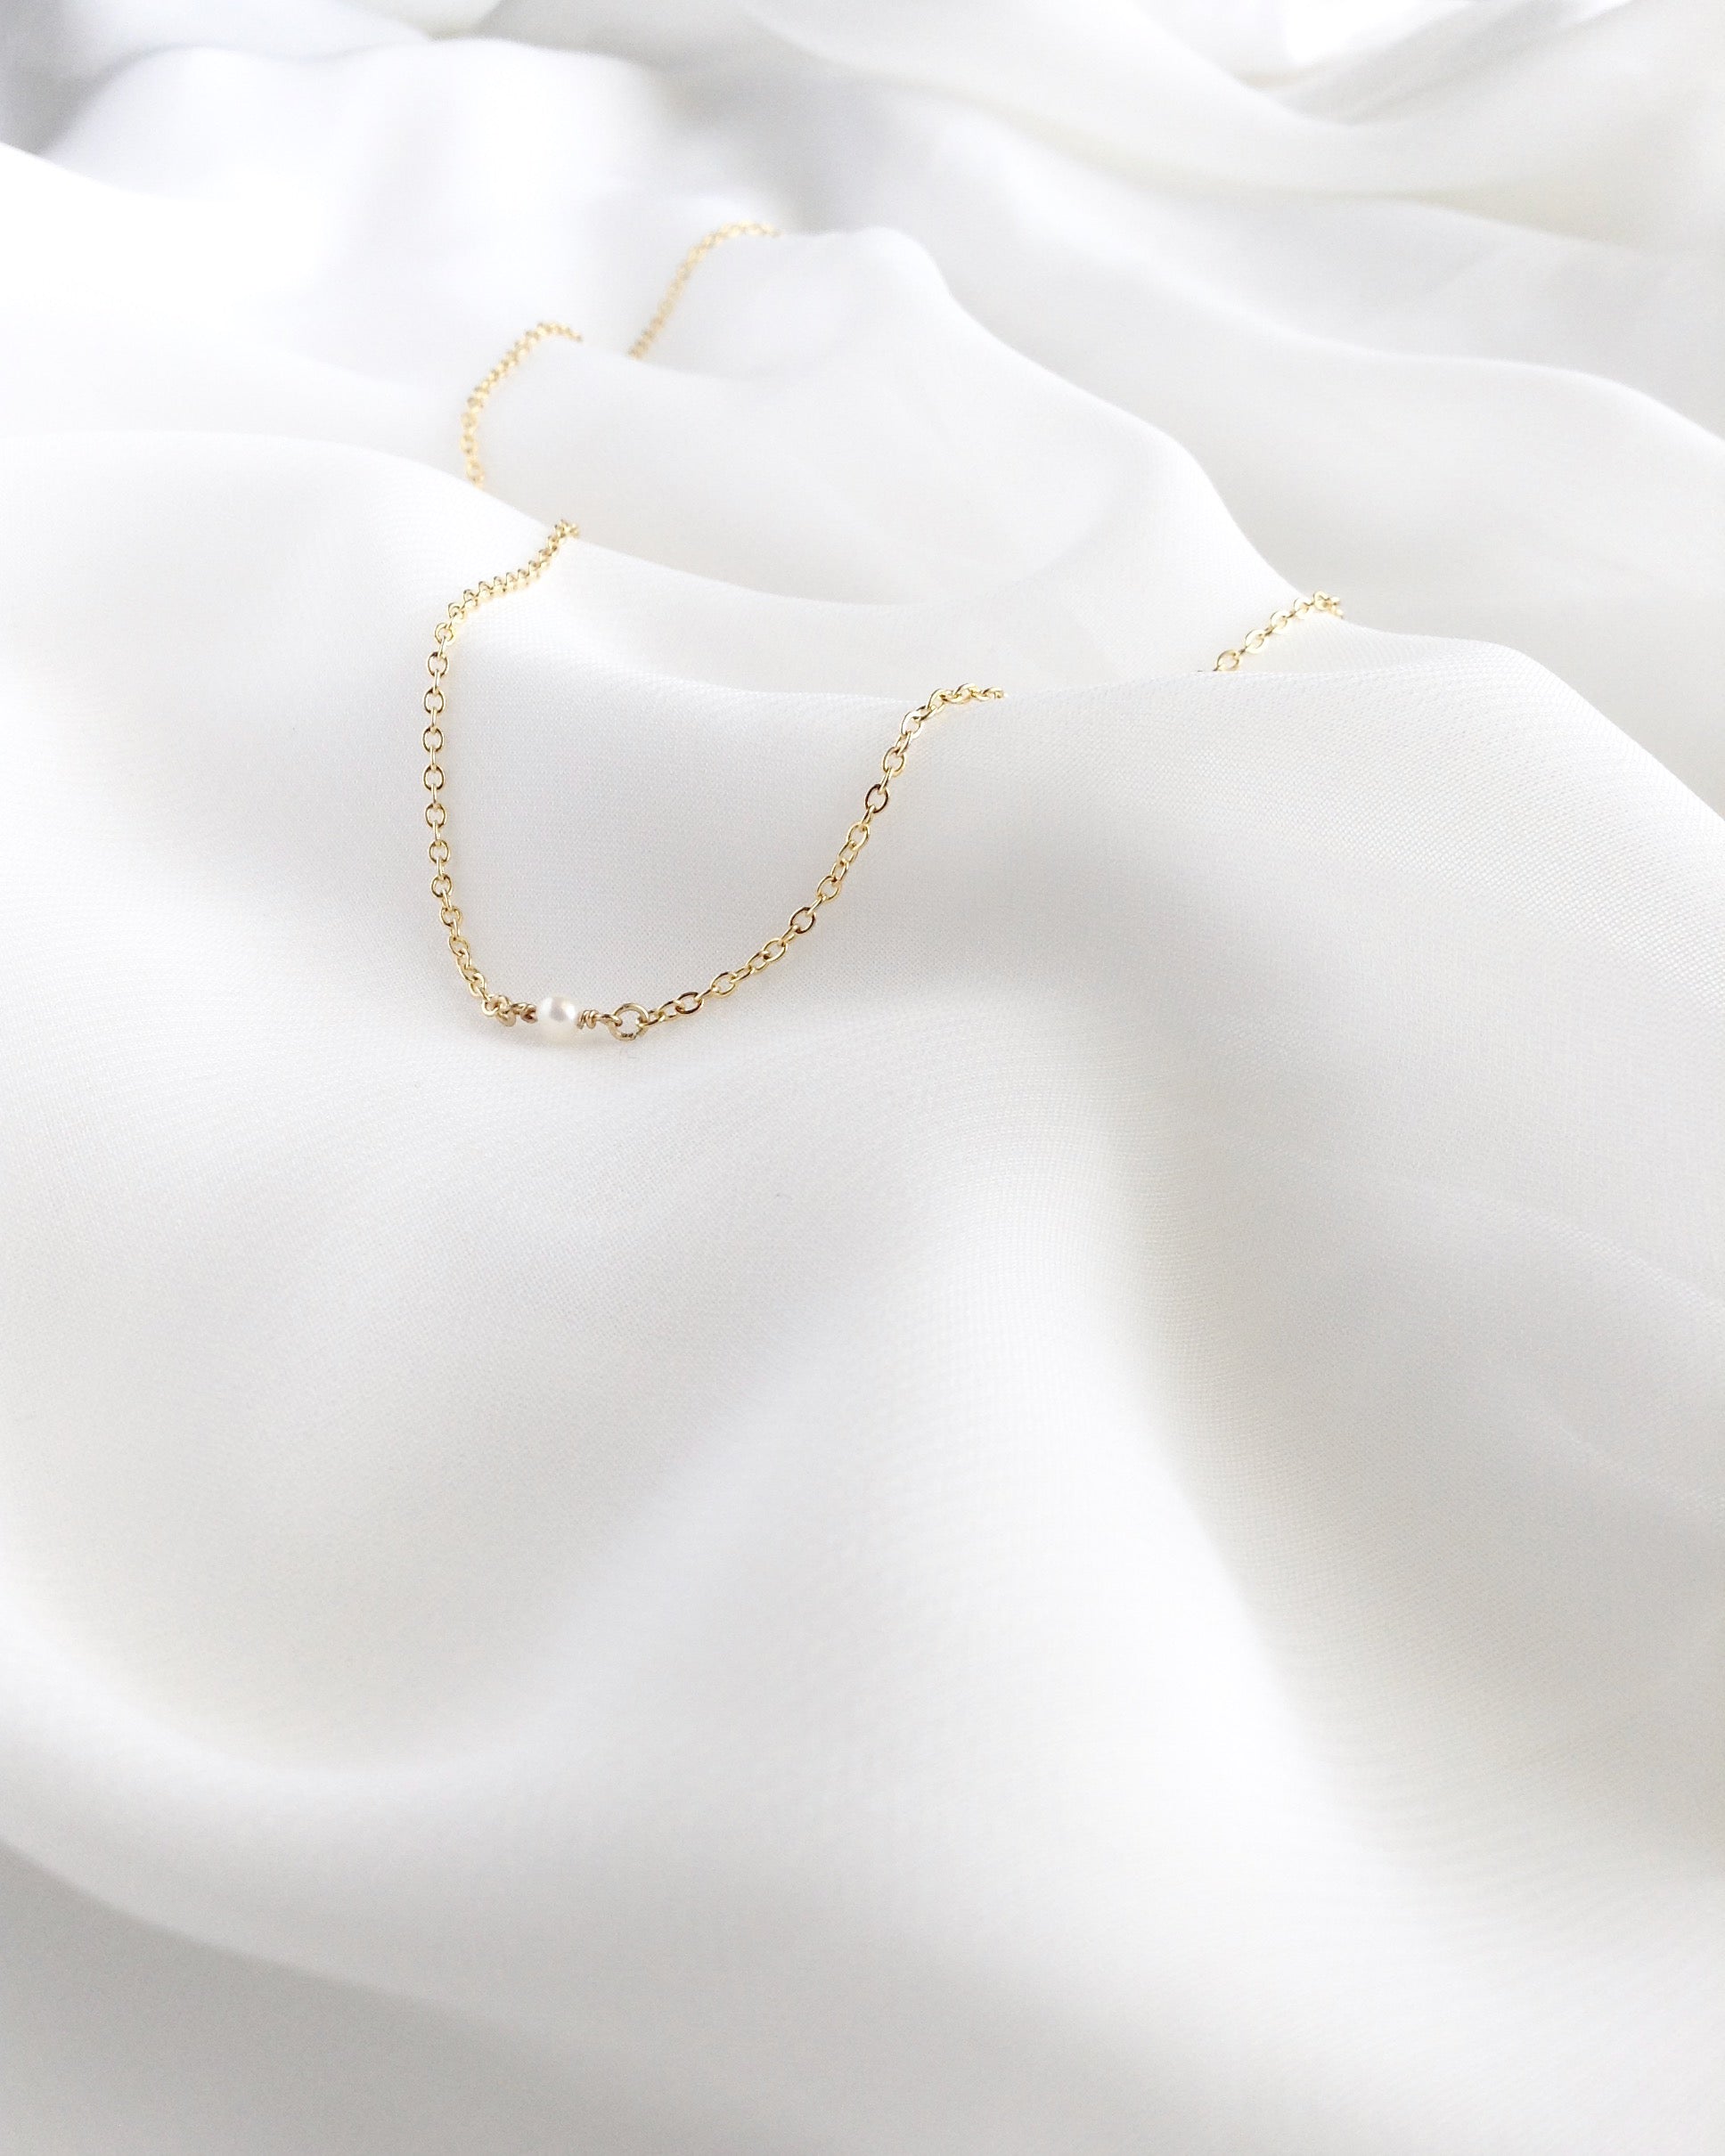 Minimalist Pearl Necklace in Gold Filled or Sterling Silver | Simple Delicate Necklace | IB Jewelry